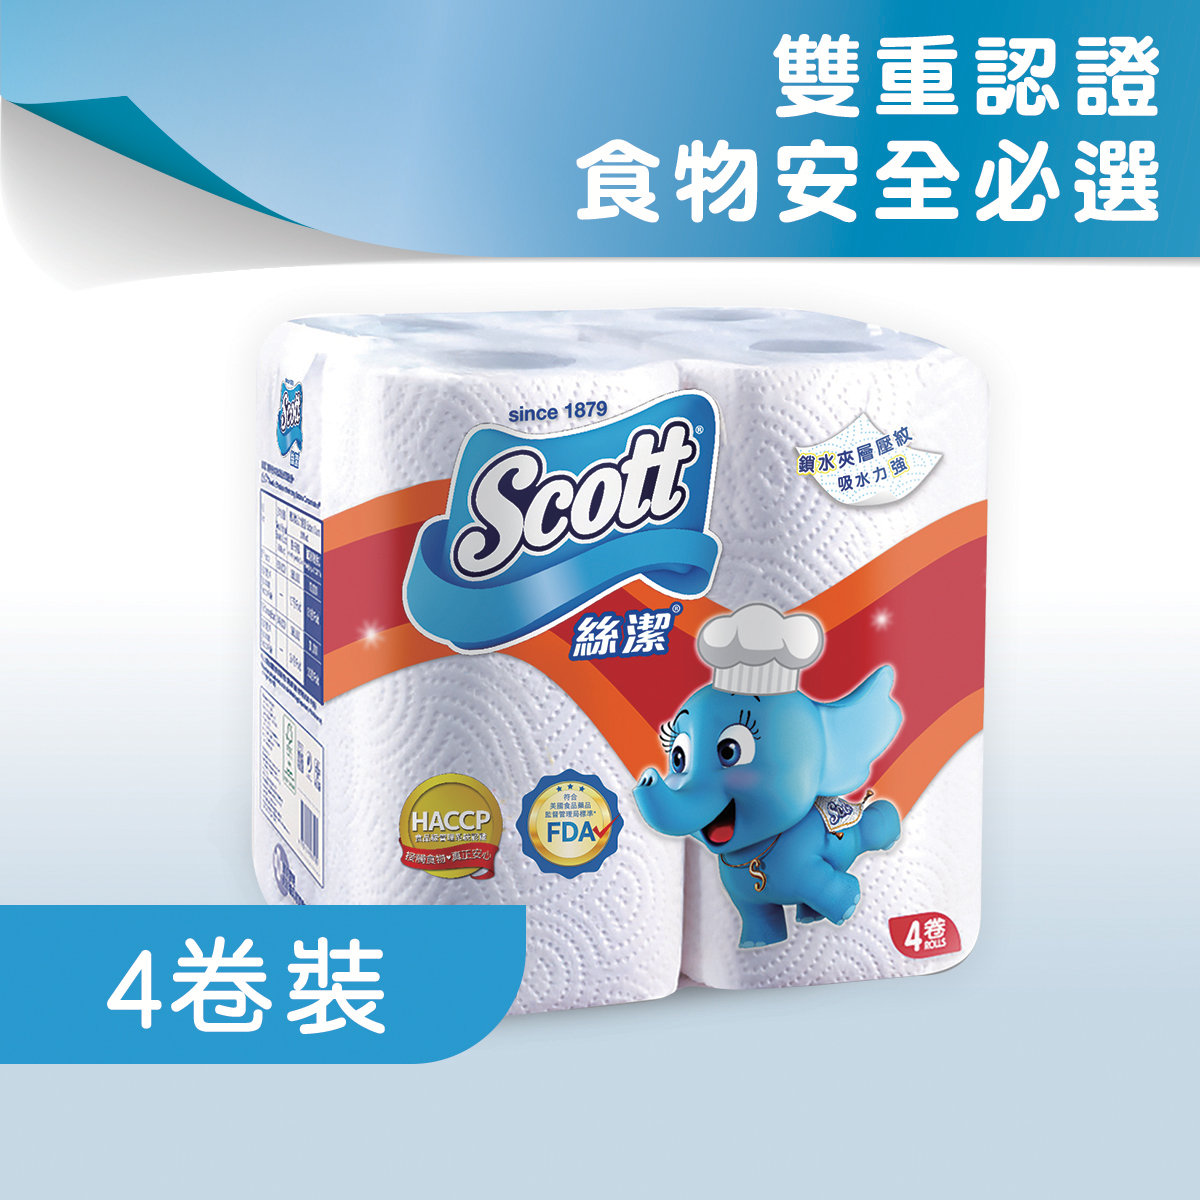 Kitchen Towel 4R (No.1 in HK, Made in TW, US Brand, Passed HACCP, FDA , FSC Certified)